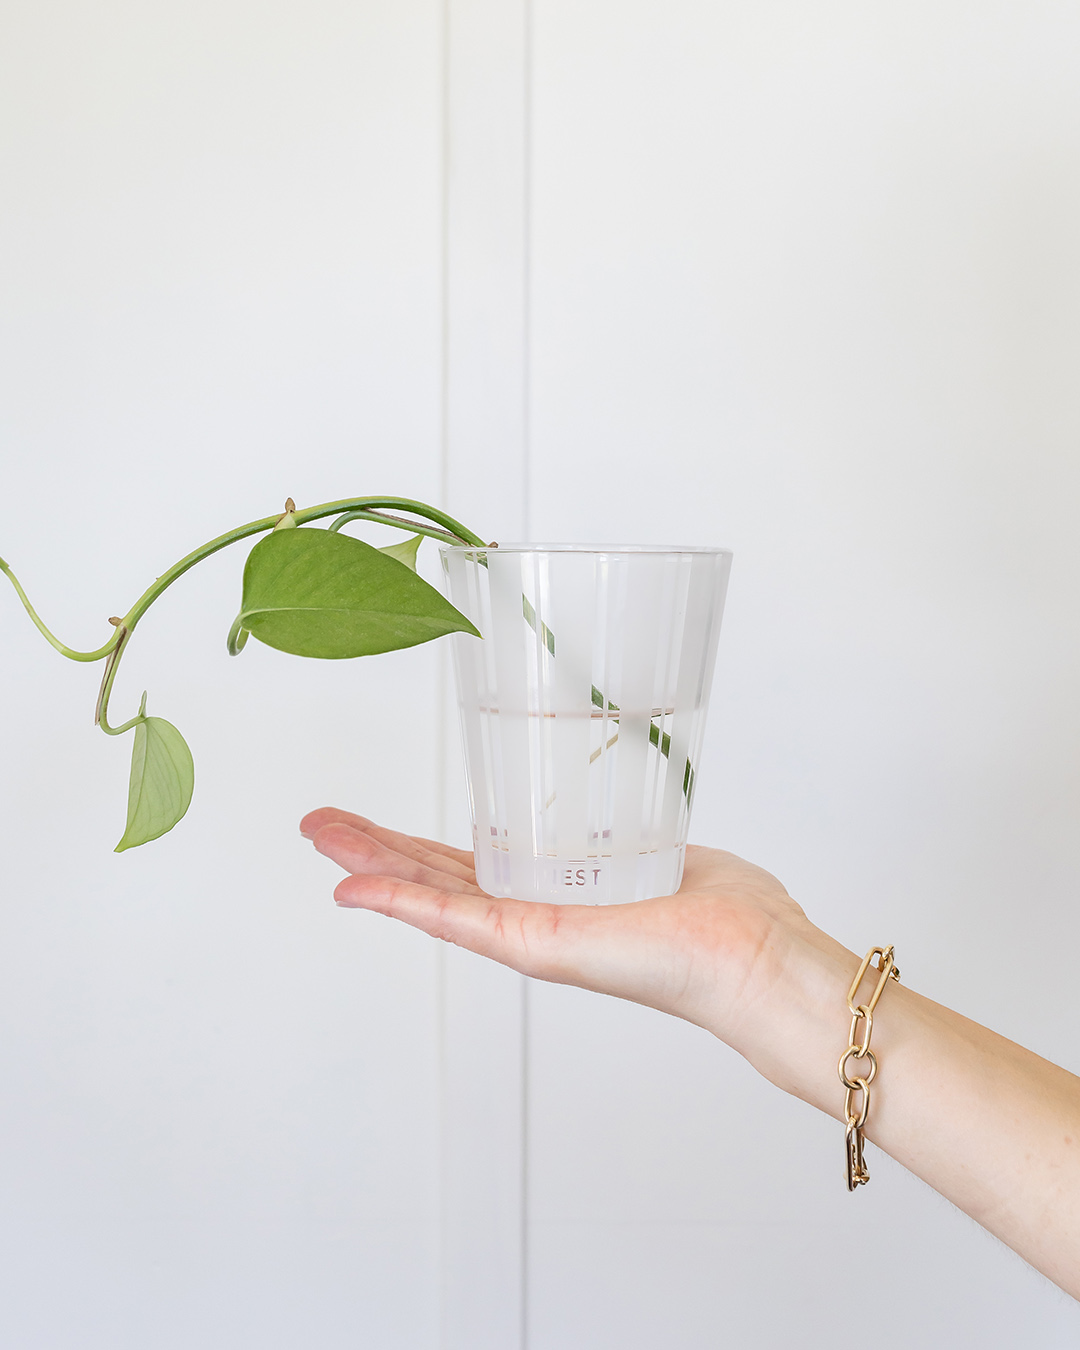 Once you have one pothos plant, it's easy to propagate it over and over again to create more for yourself and to share with friends and family! Here's how to propagate pothos plants!